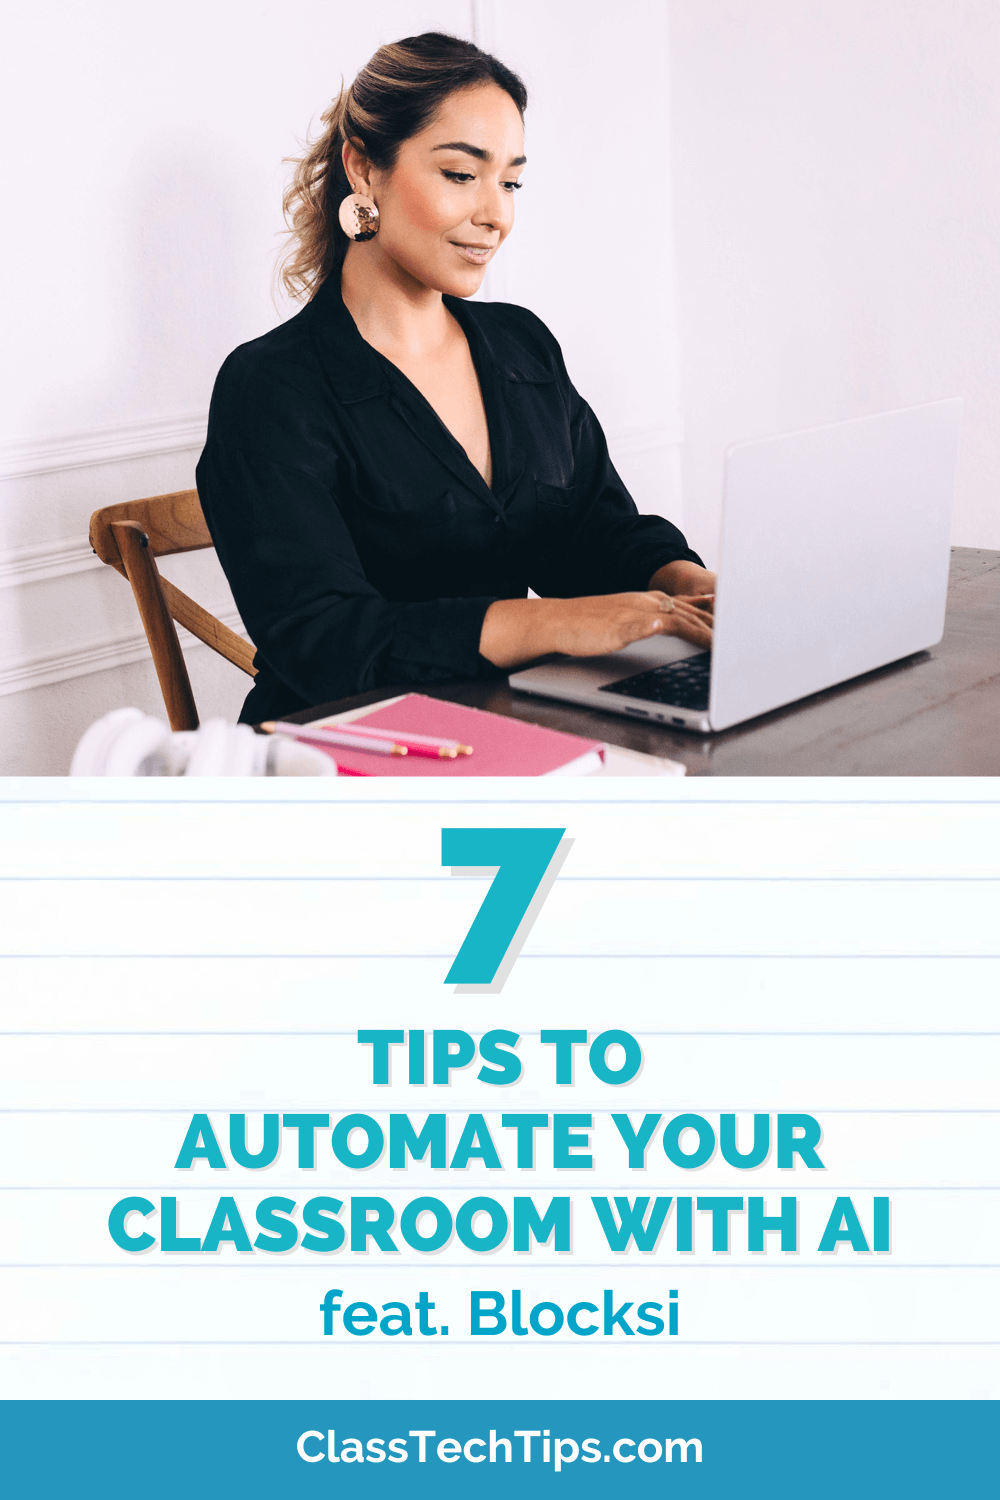 A teacher with her hair tied back sits at a desk working on a laptop. The image has text overlaid that reads, "7 Tips to Automate Your Classroom with AI feat. Blocksi" at the top.